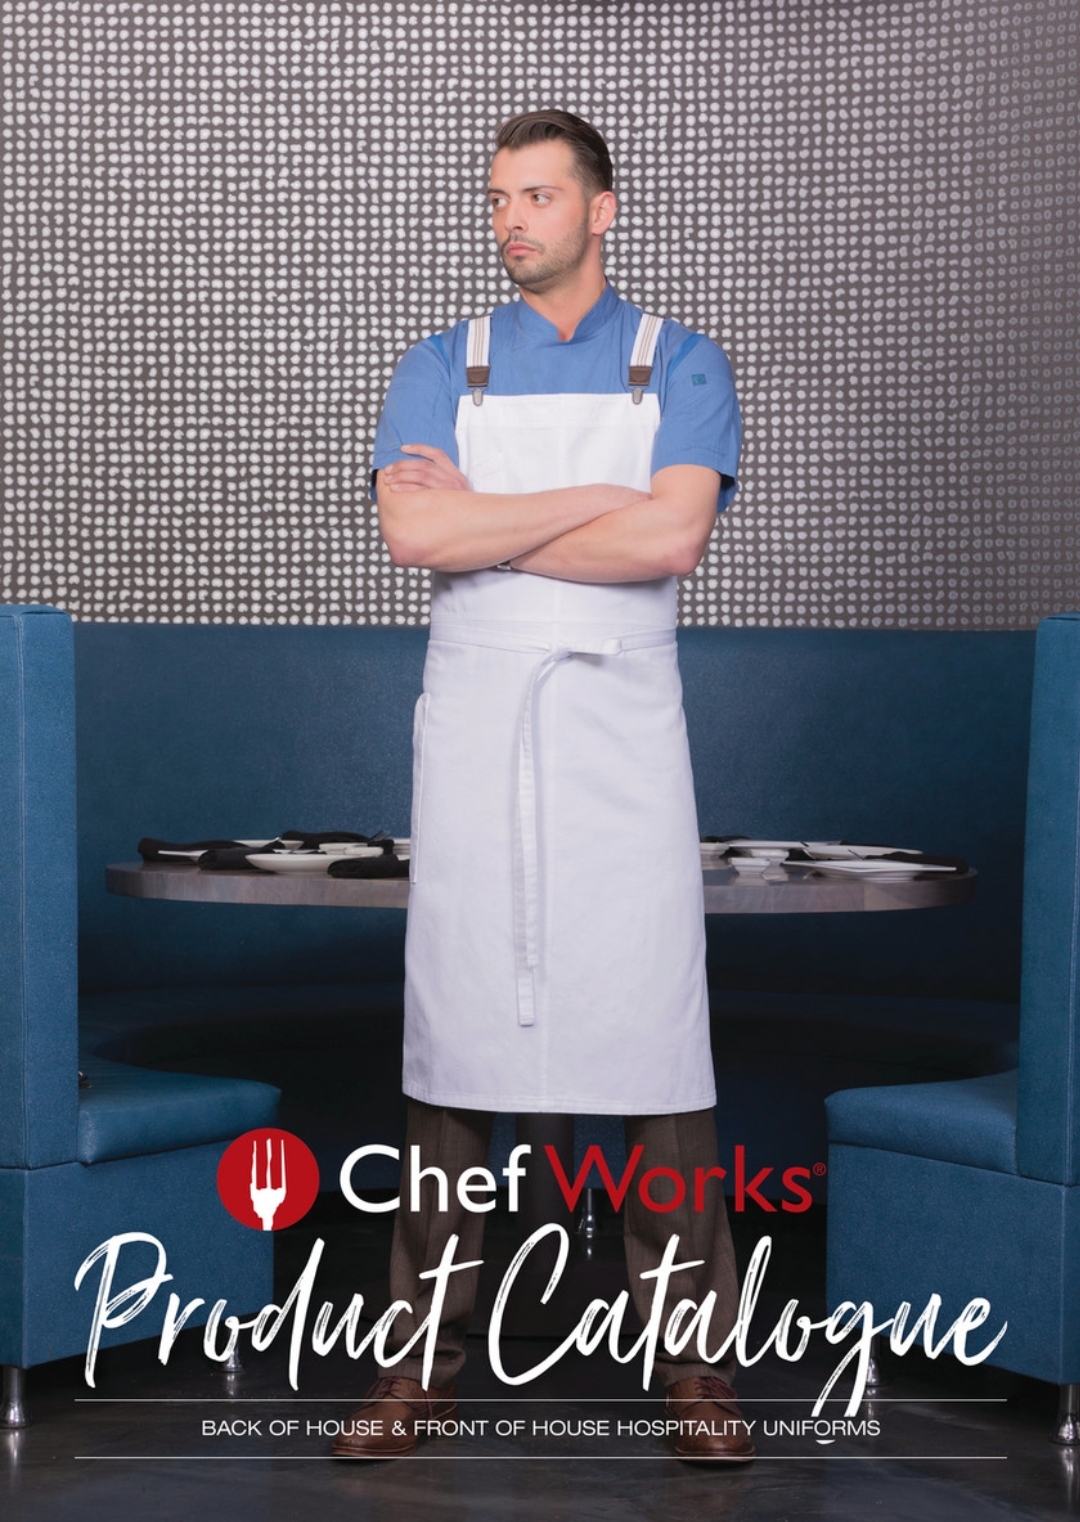 What should Chefs wear in a kitchen?: The Shoes For Crews checklist